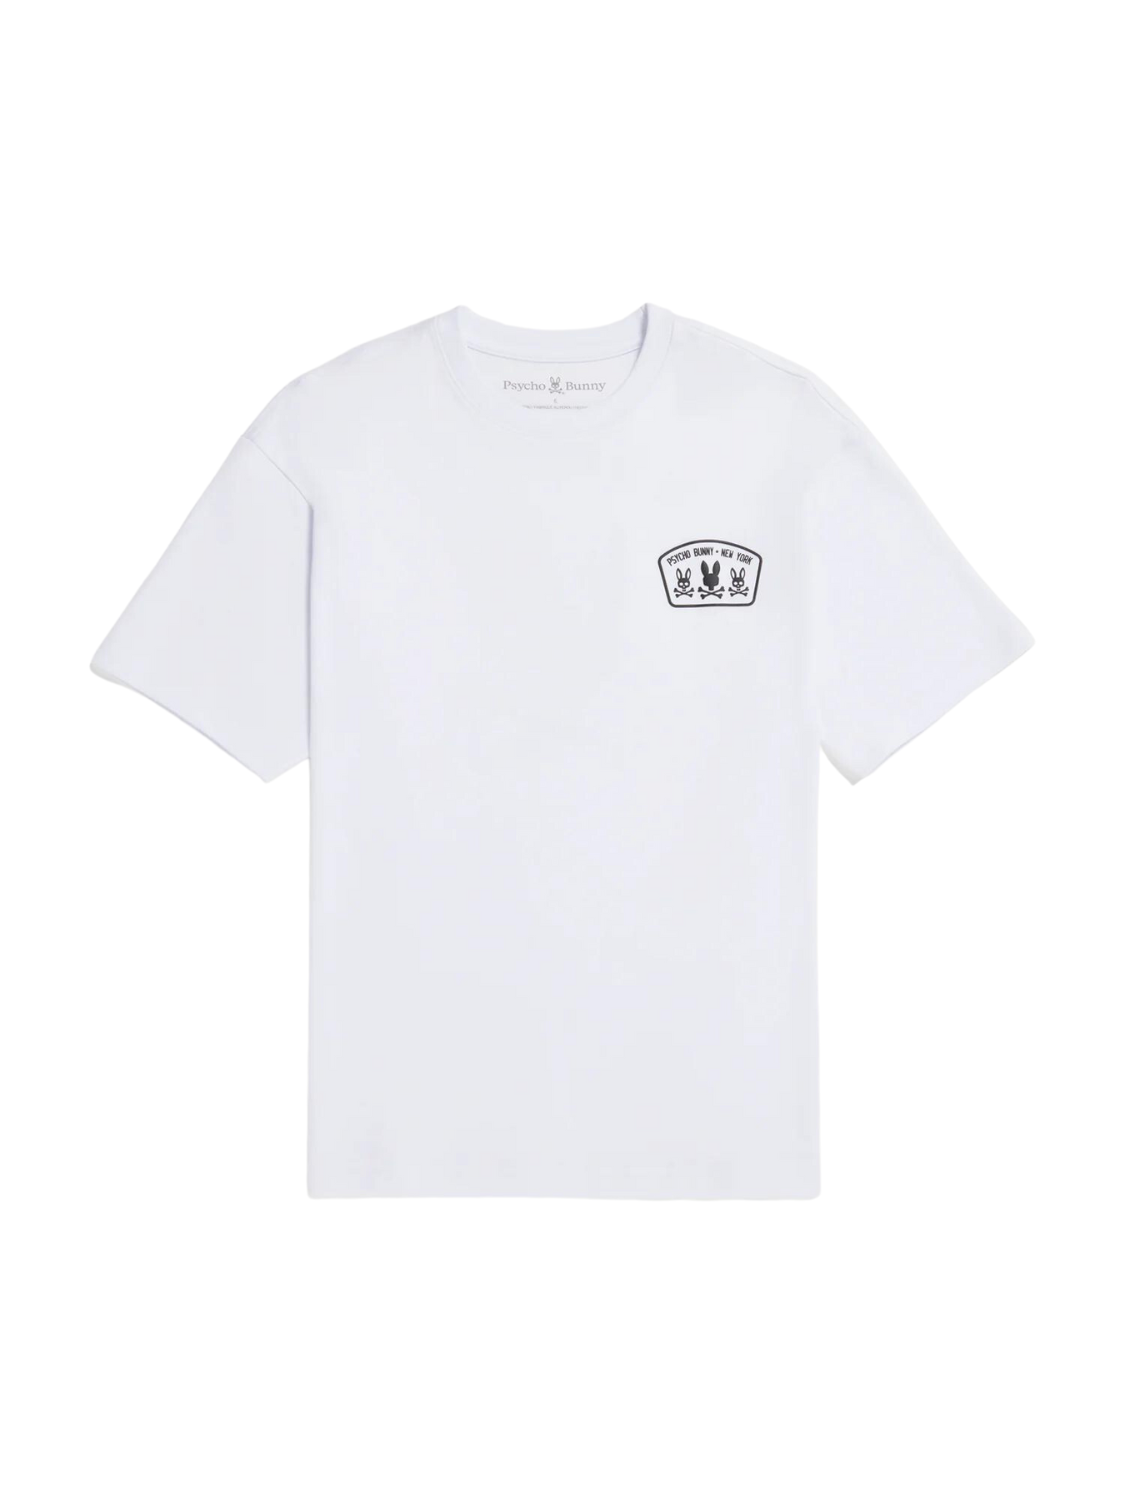 Relaxed Fit Short Sleeve Graphic Tee - White